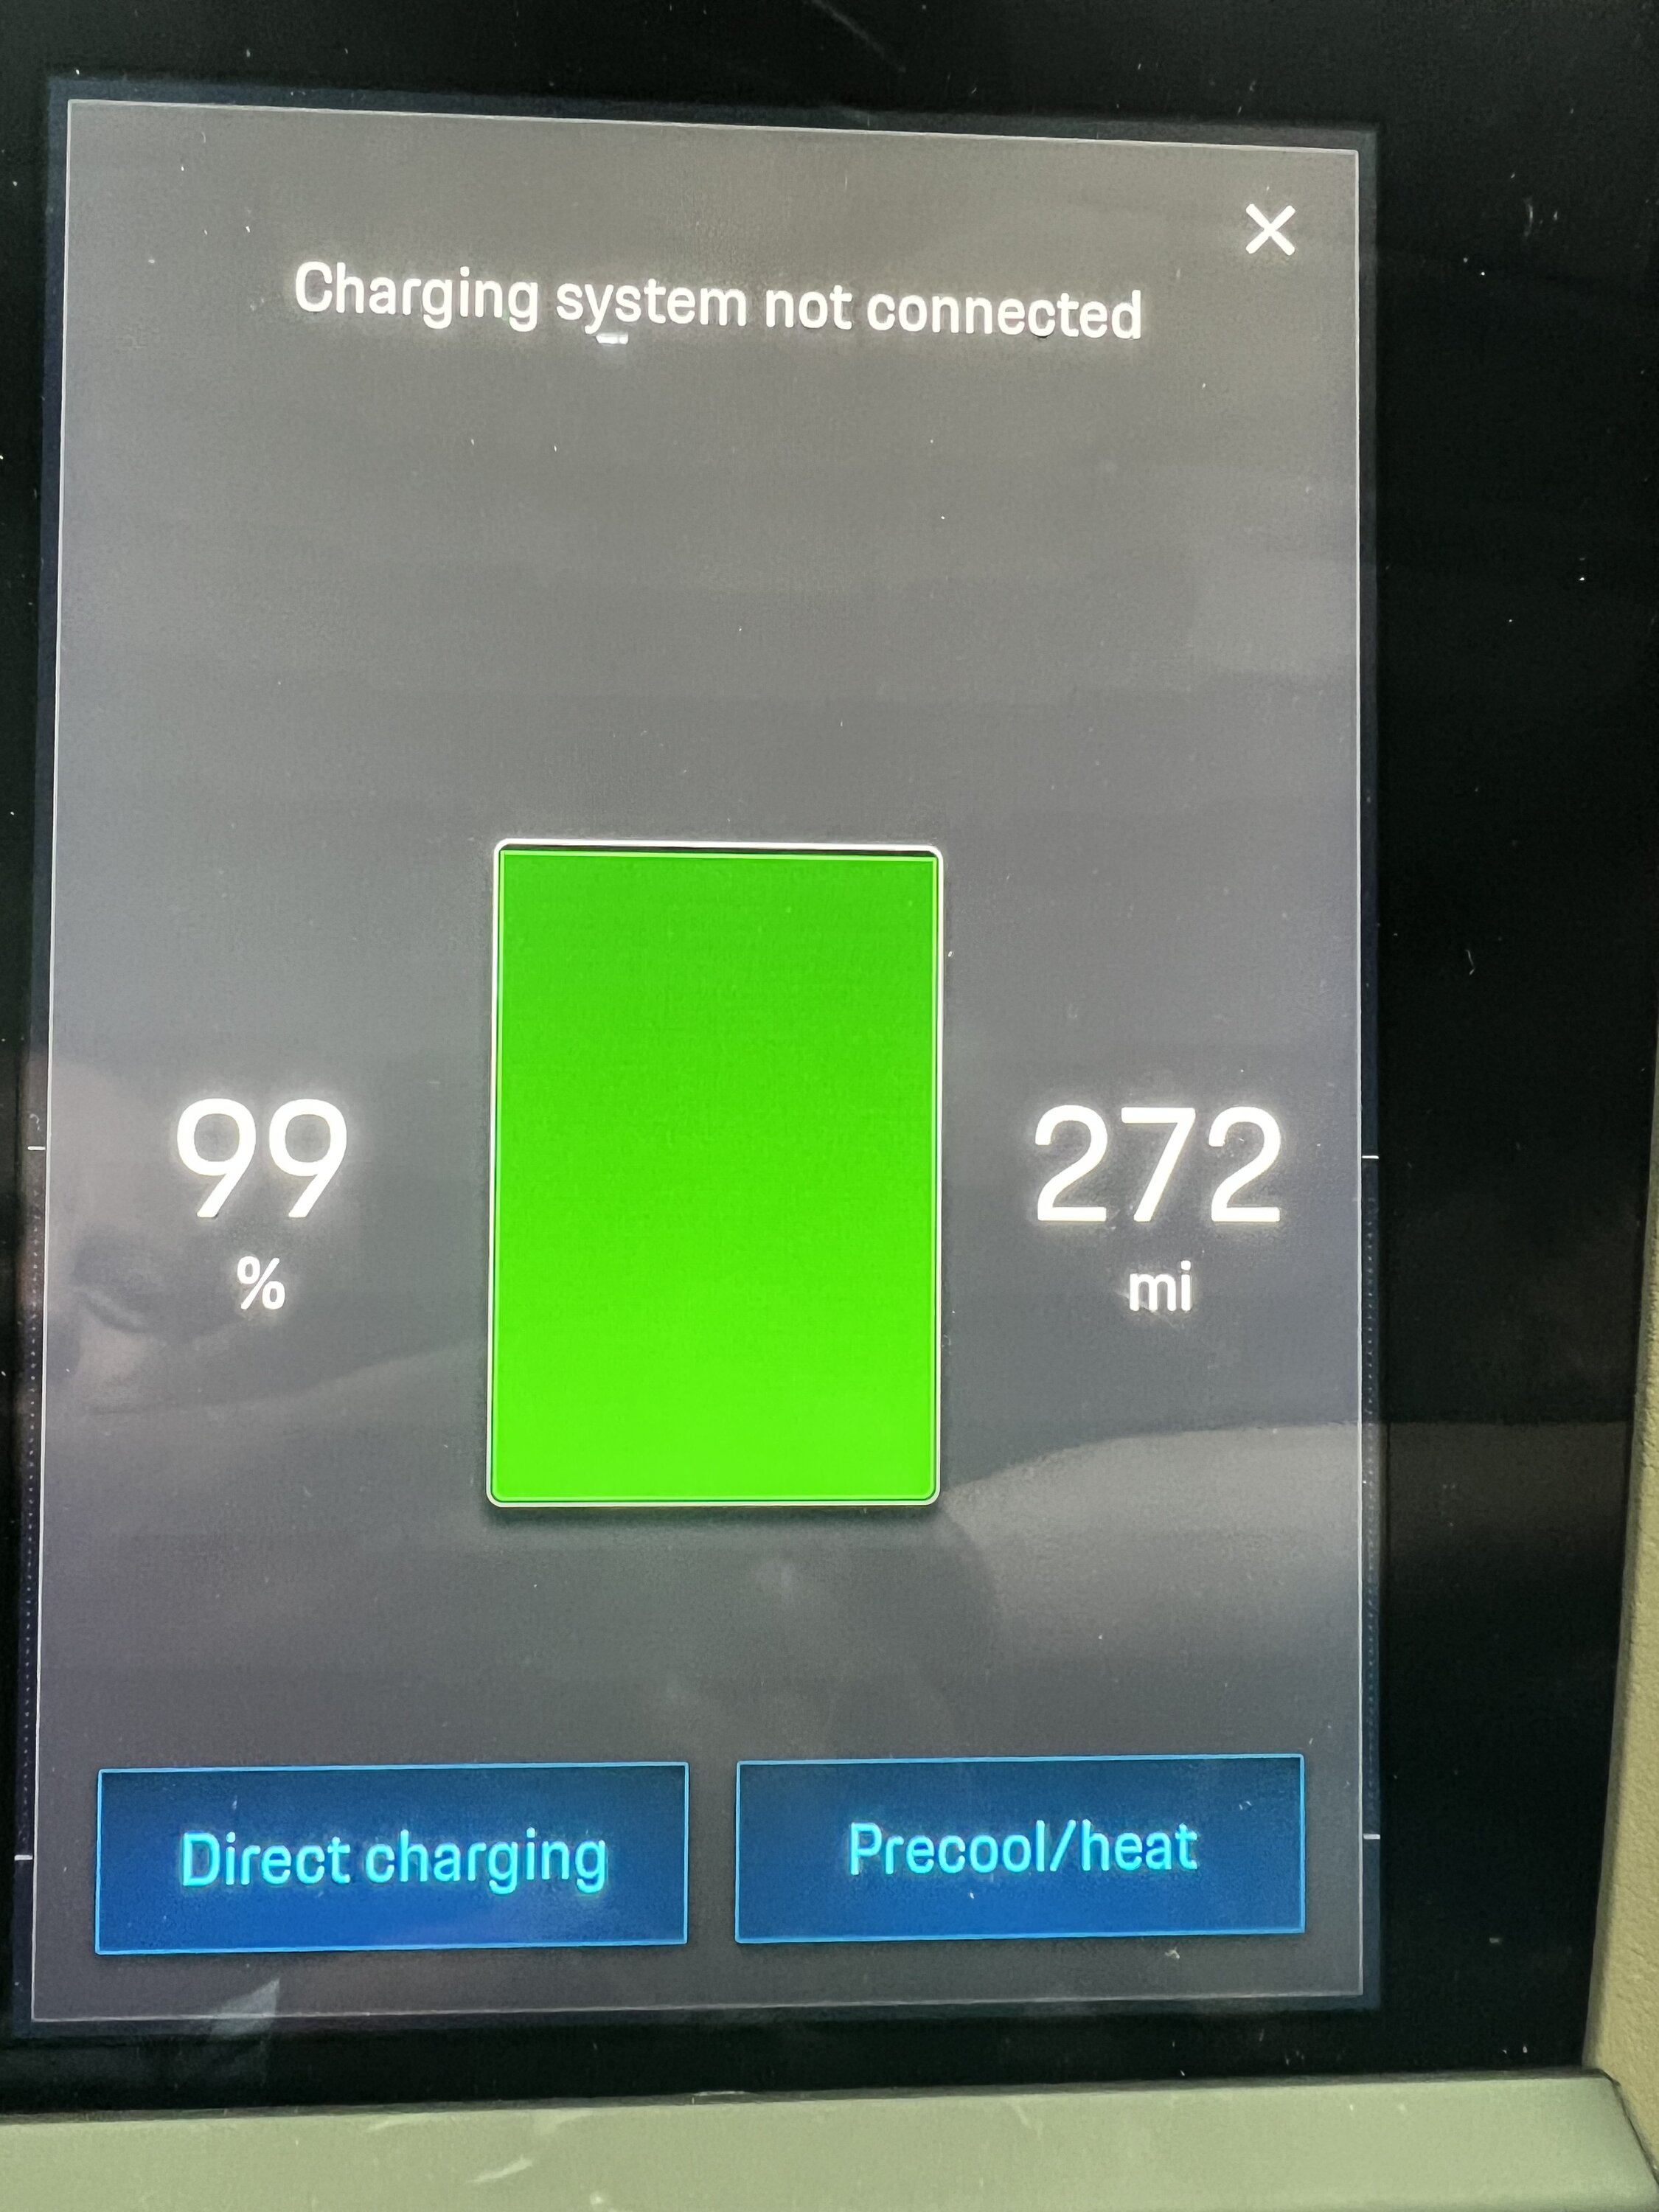 Porsche Taycan Battery Range: Is 100% full charge of 188 miles the best I can expect? IMG_0923